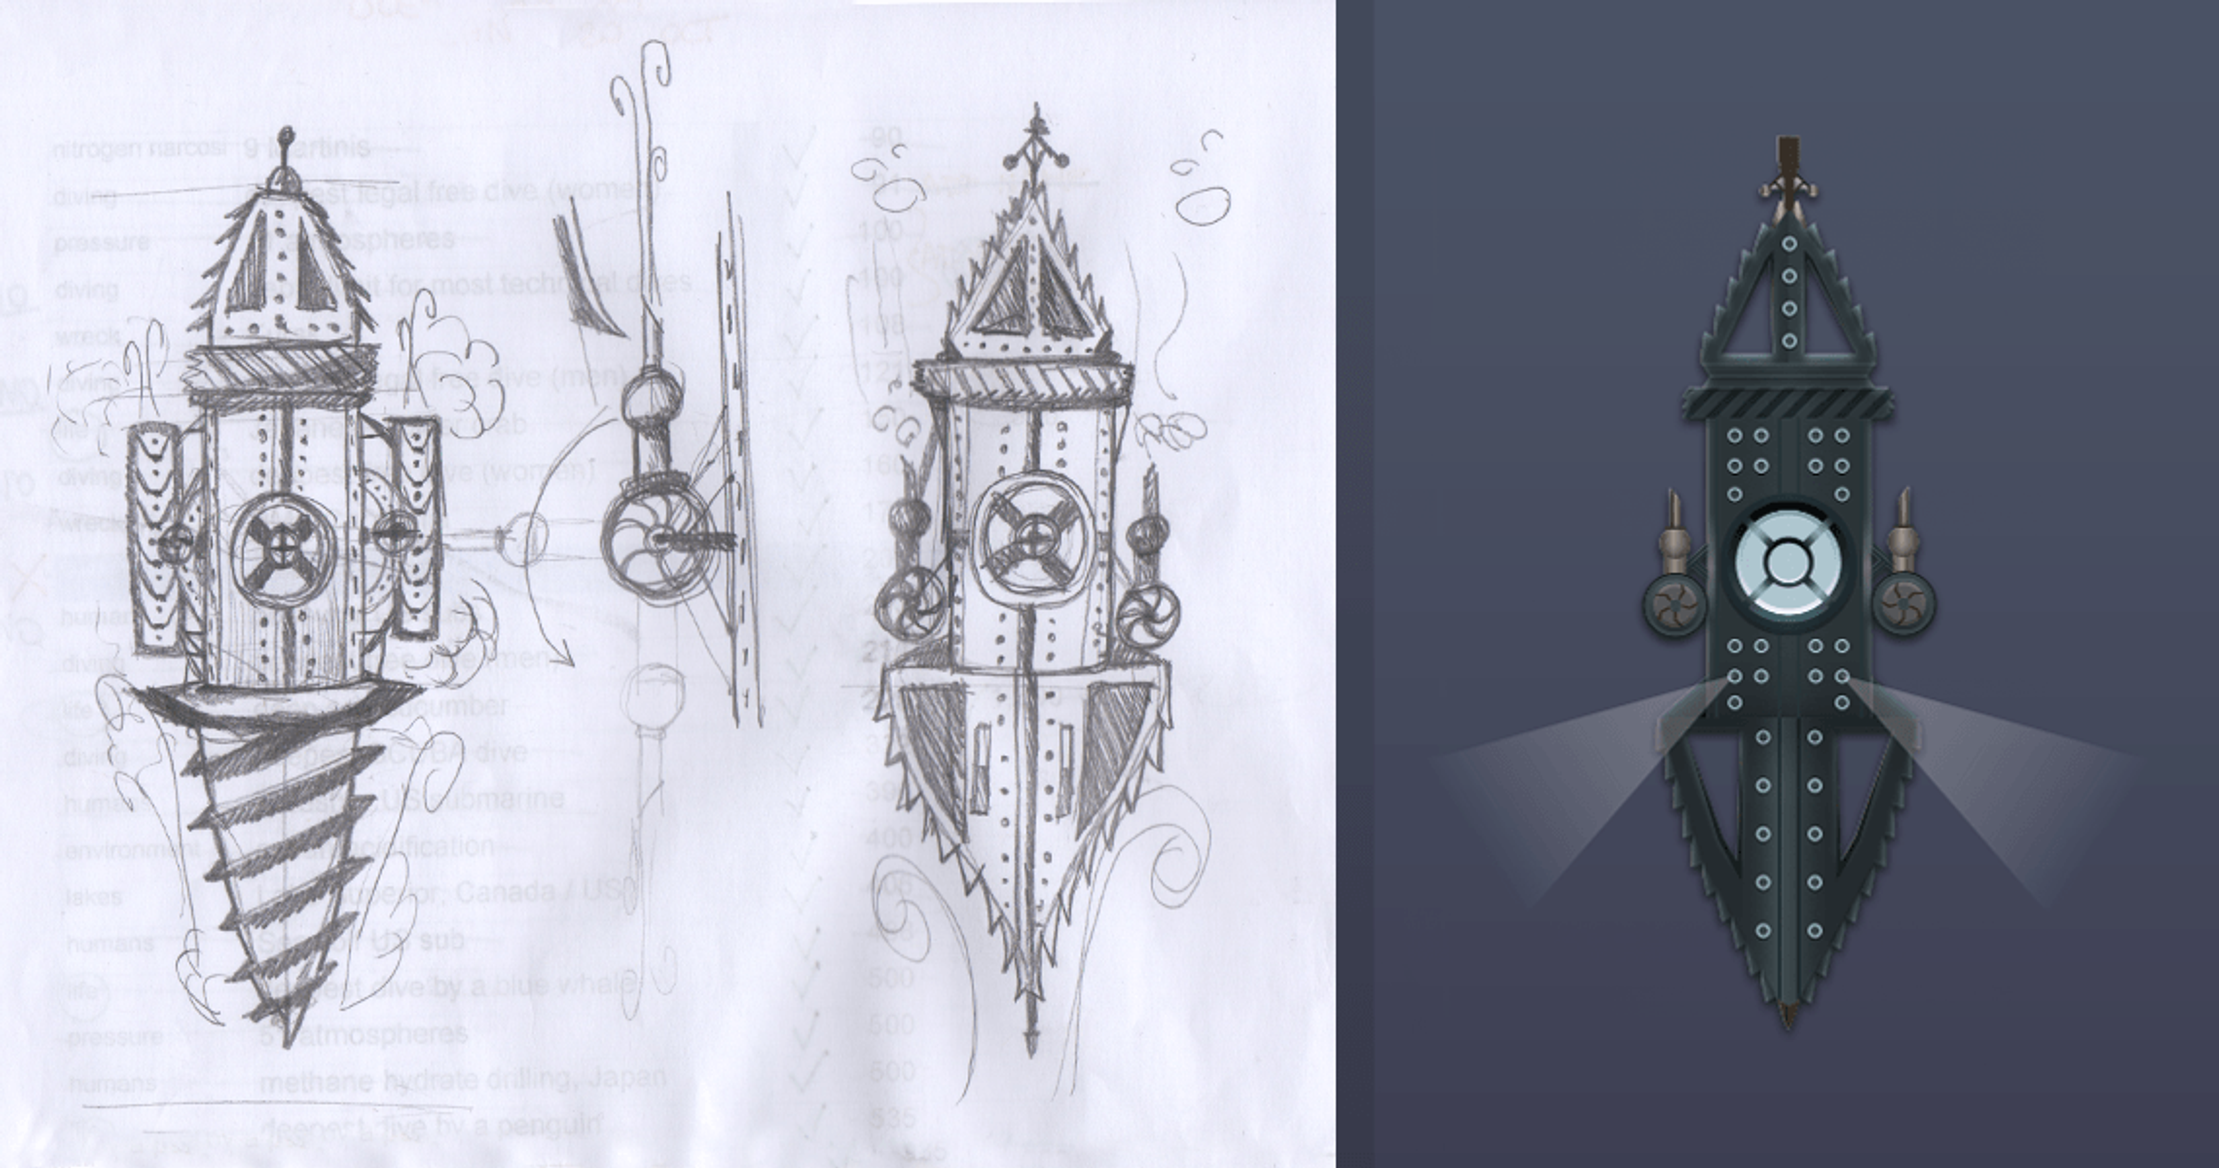 Two sketches of the underground and deep sea explorers designed in the steampunk style of Jules Verne's story. On the right is the final illustration of the deep sea diver used on the Journey to the Centre of the Earth page.